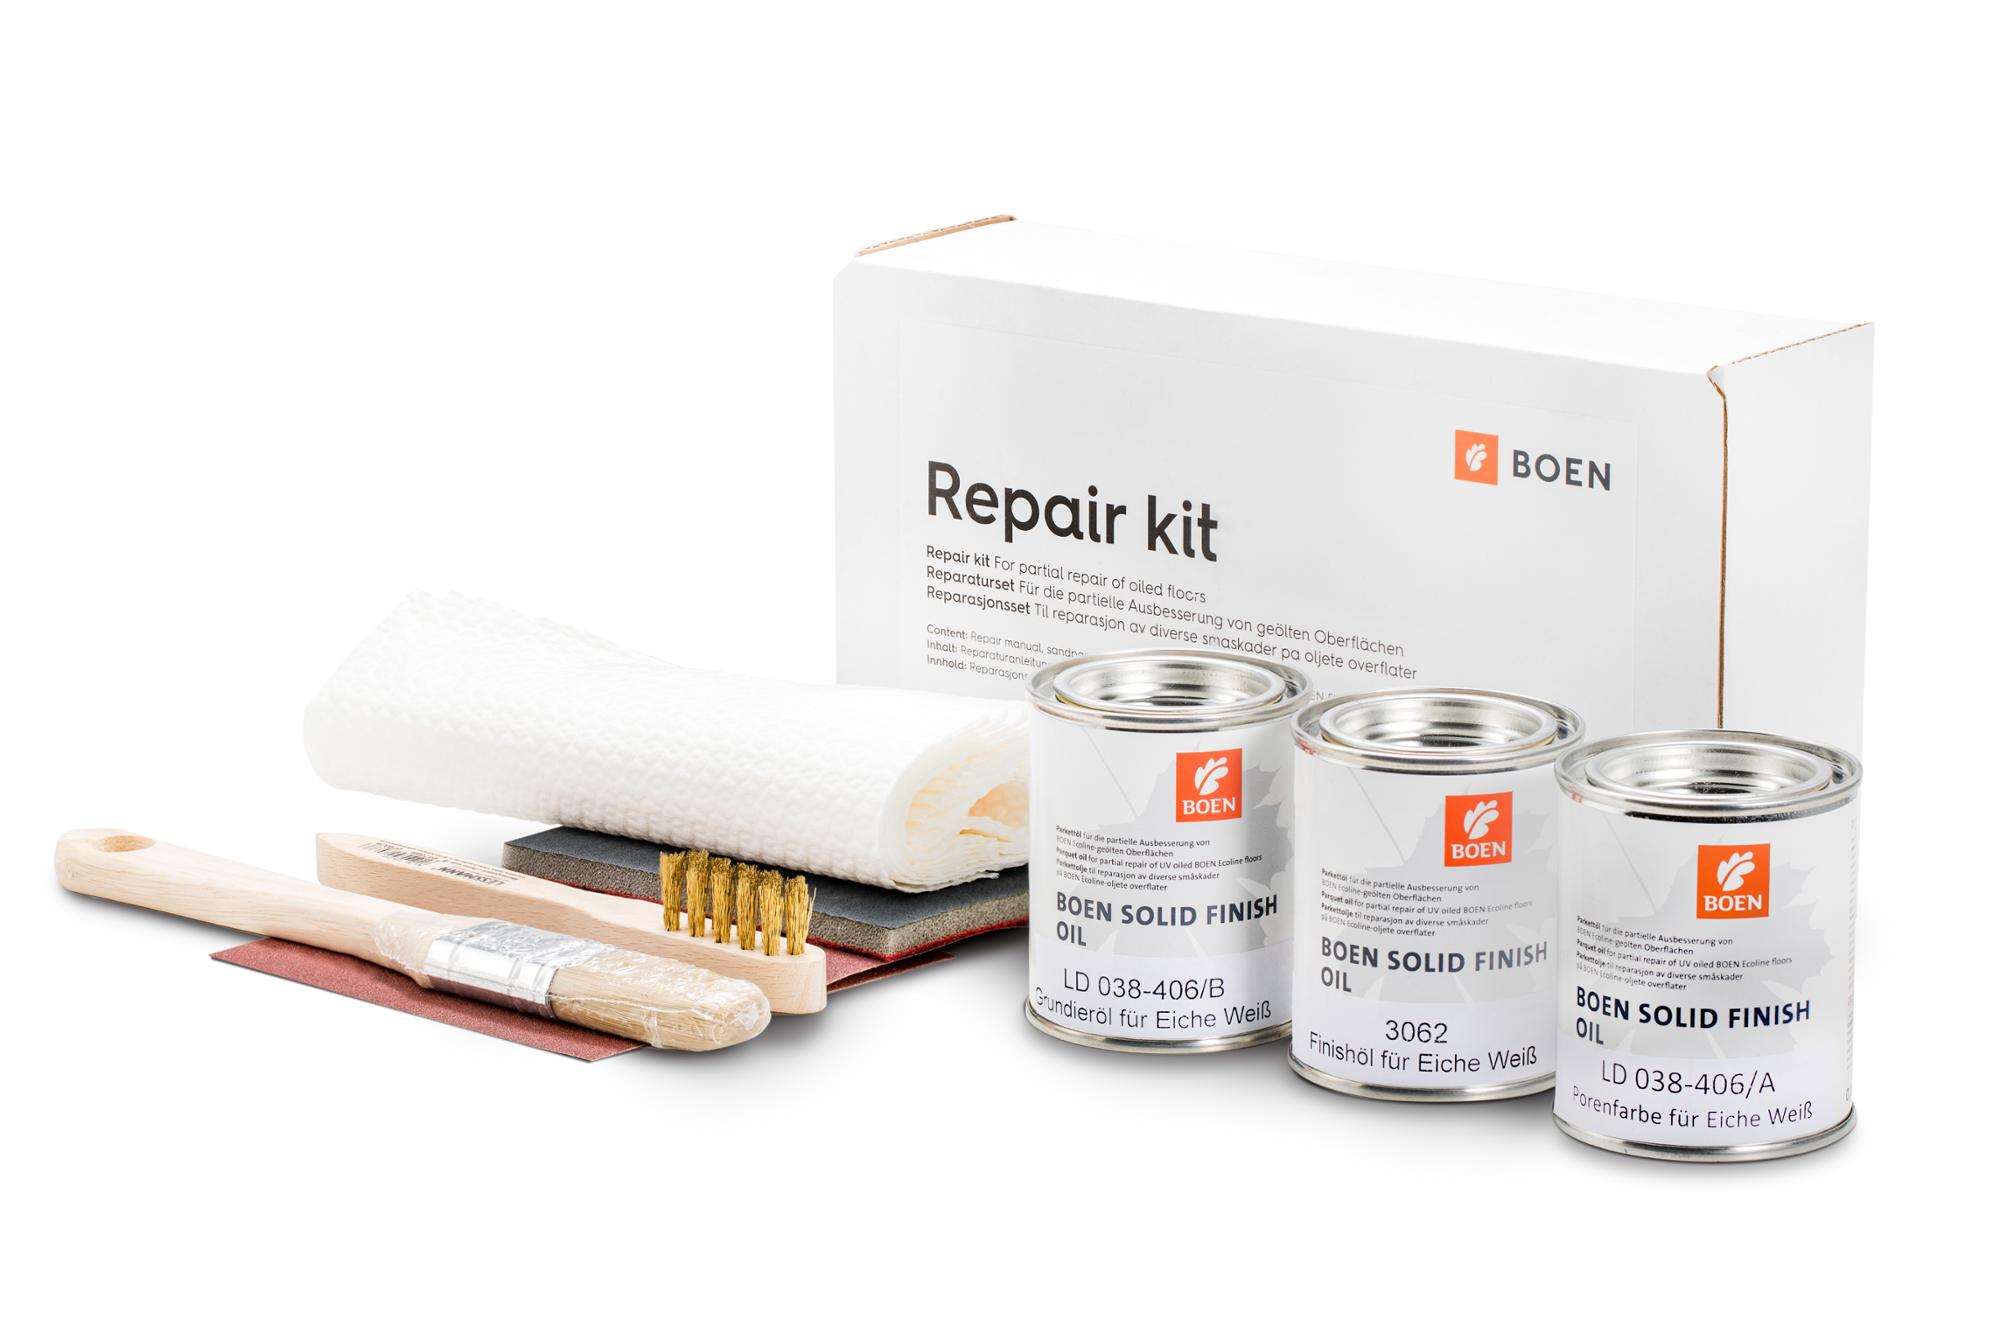 BOEN kit riparazione per Rovere (sbiancati)

For the partial repair of natural oiled surfaces.
Content: Repair instruction, abrasive paper P 150,
abrasive web P 360, 0,125 l BOEN Live Natural Oil,
paint brush, cleaning cloths.